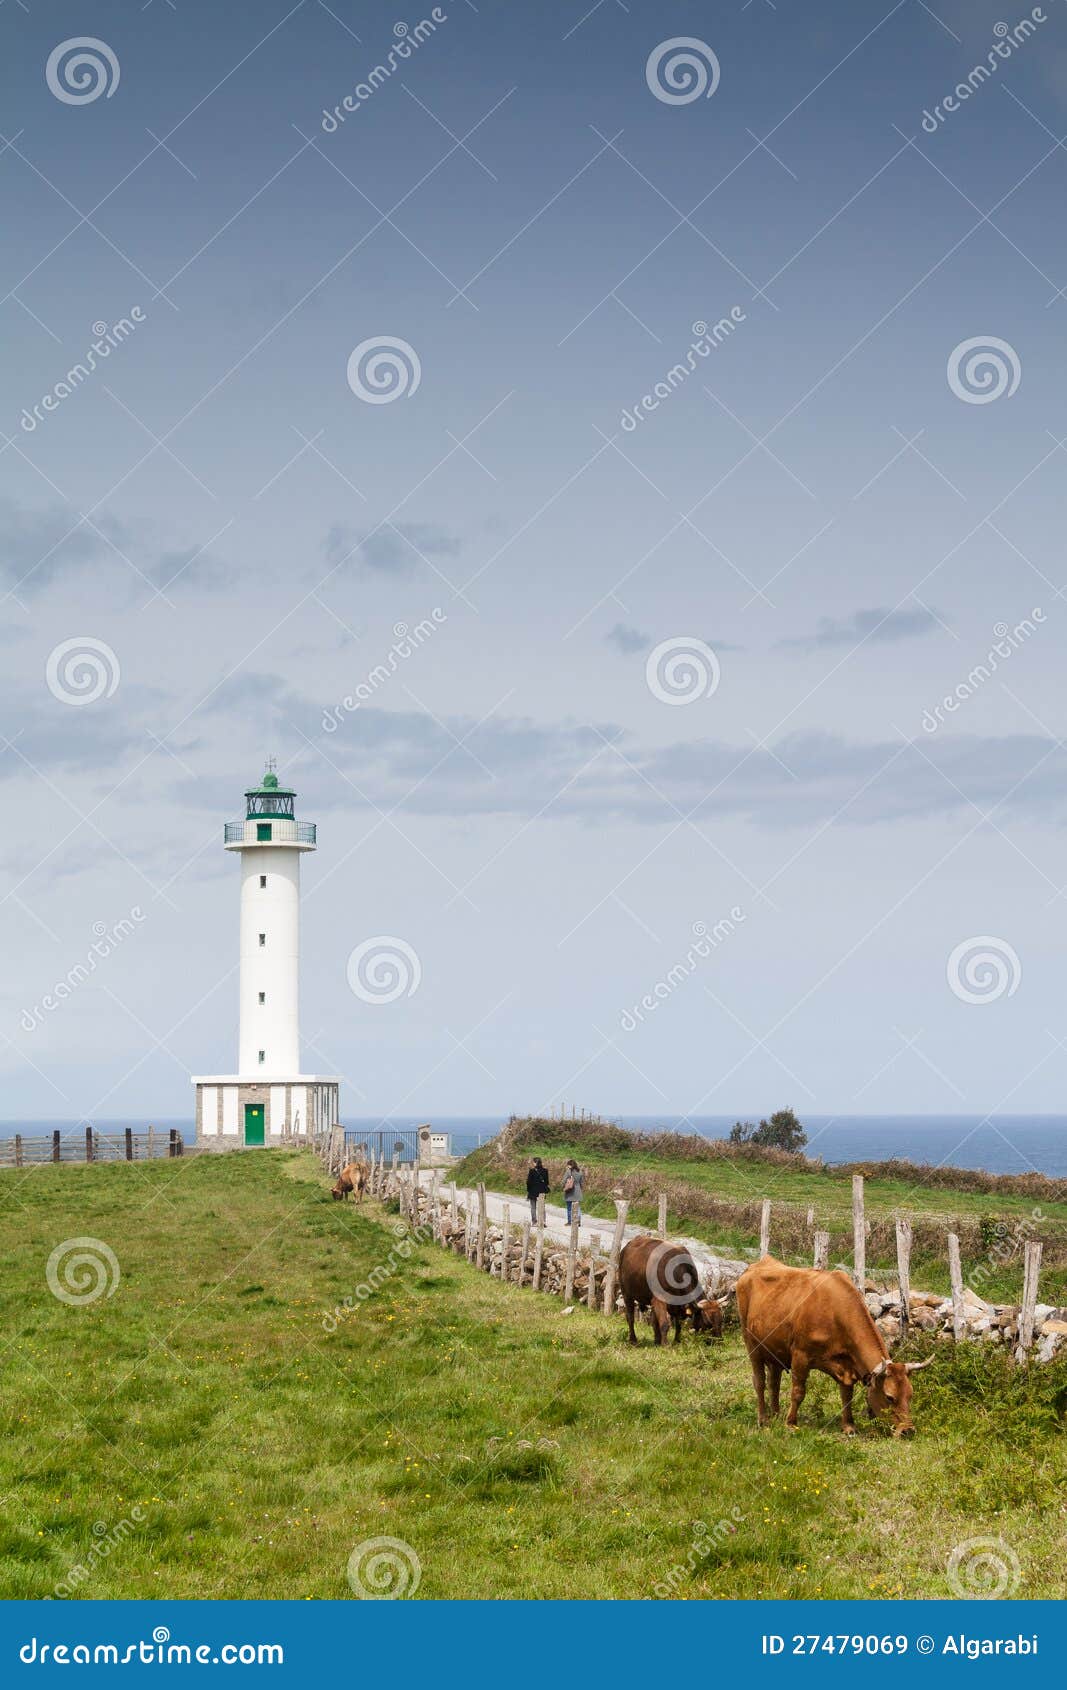 cows in the road to the lighthouse